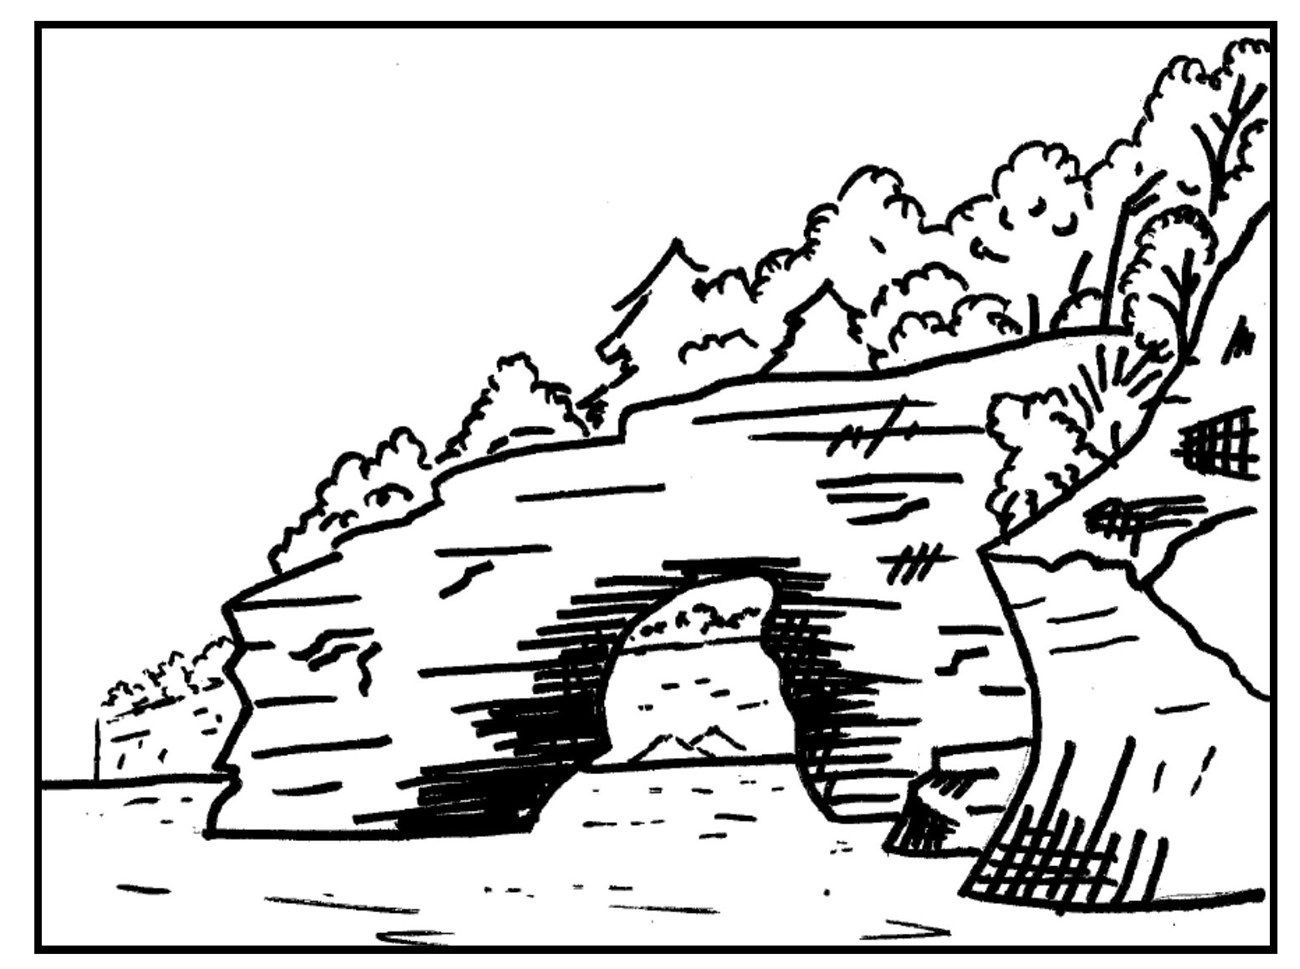 Black and white drawing of the cliffs for you to color.